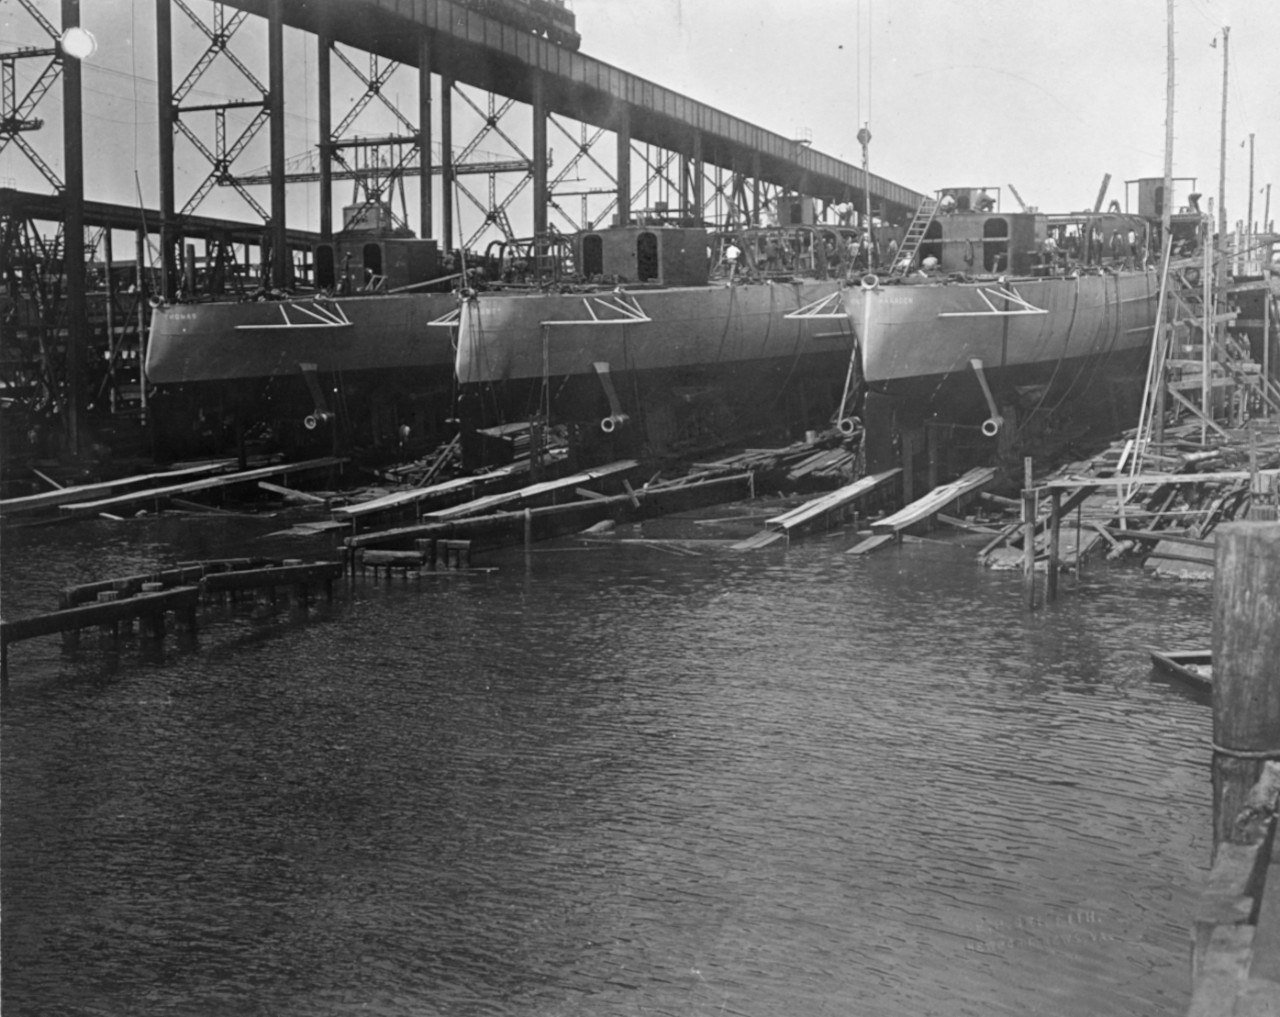 Three destroyers ready for launching on 4 July 1918 at Newport News Shipbuilding and Drydock Company; USS Haraden (DD-183), USS Abbot (DD-184), and USS Thomas (DD-182). Photo by E.P. Griffith of Newport News.